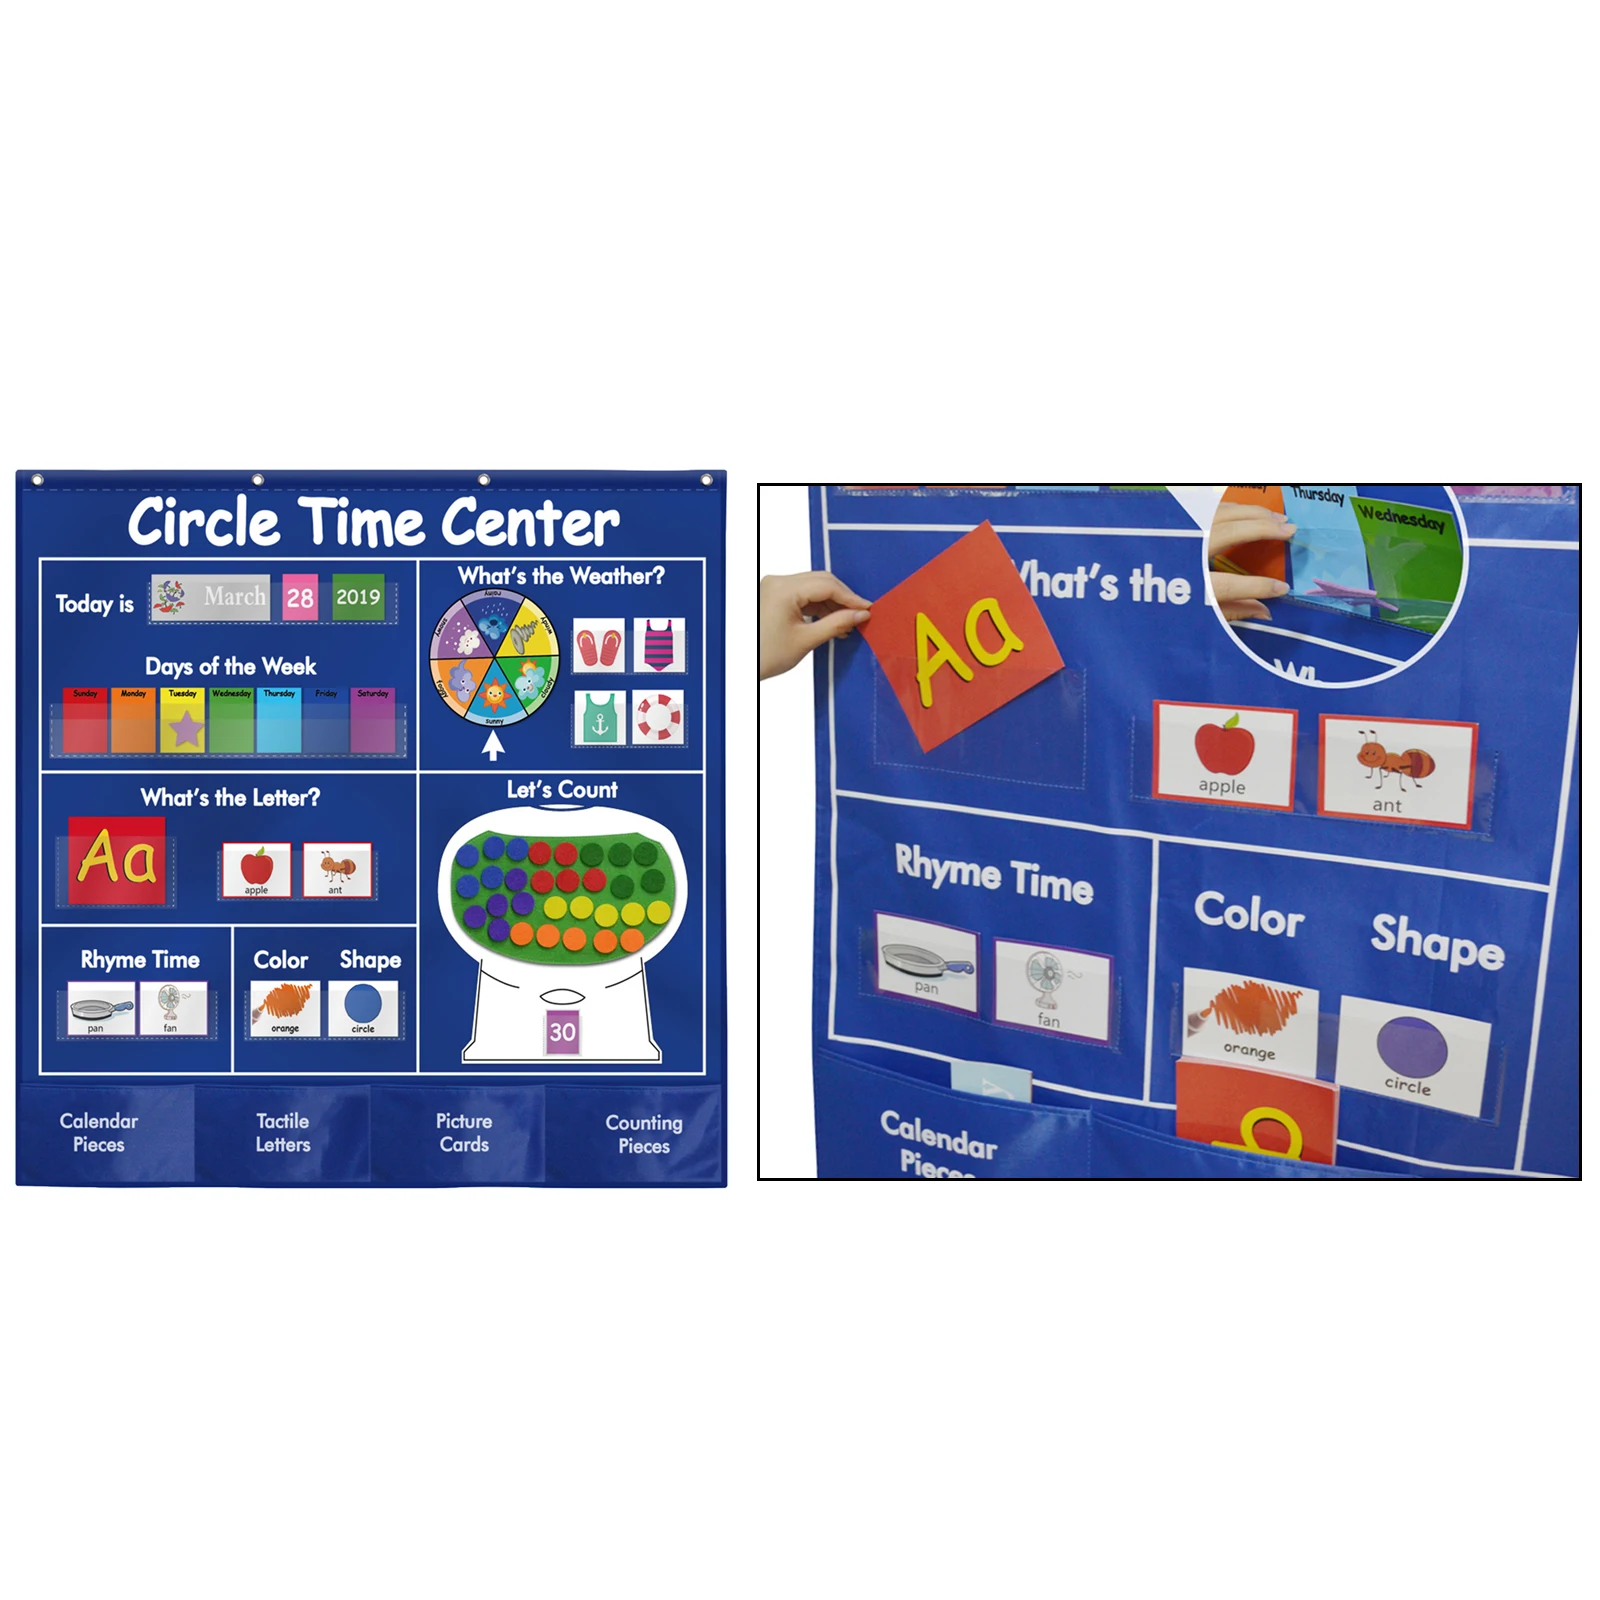 Circle Time Center Children, Toddler, Nursery, Early Learning, Kindergarten, Classroom Wall Chart Birthday Gifts